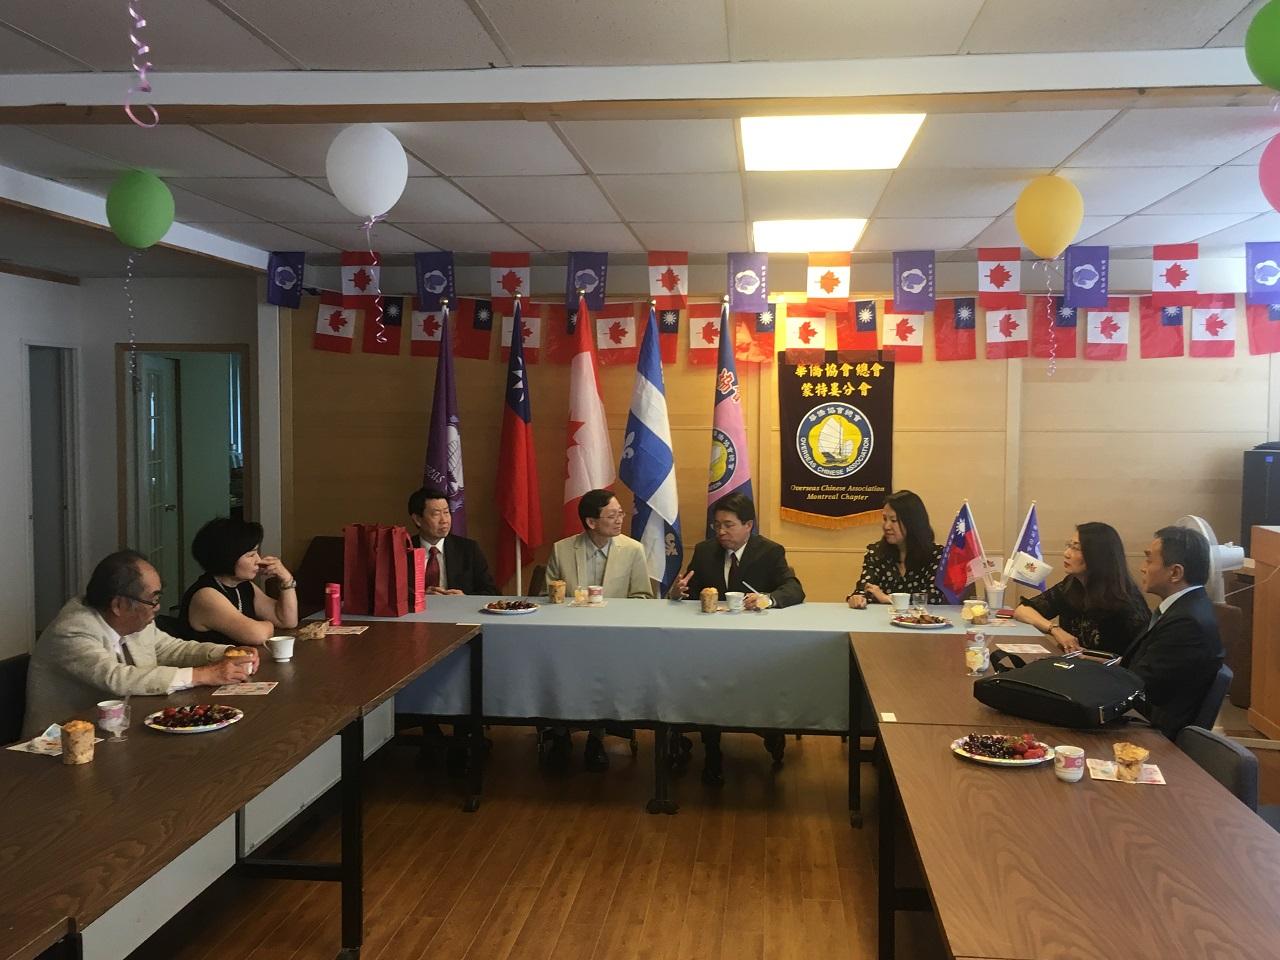 Representative Winston Wen-yi Chen of the Taipei Economic and Cultural Office in Canada (TECO) was warmly welcomed by the overseas Chinese and Taiwanese communities in Montreal on July 8, 2018   4/5